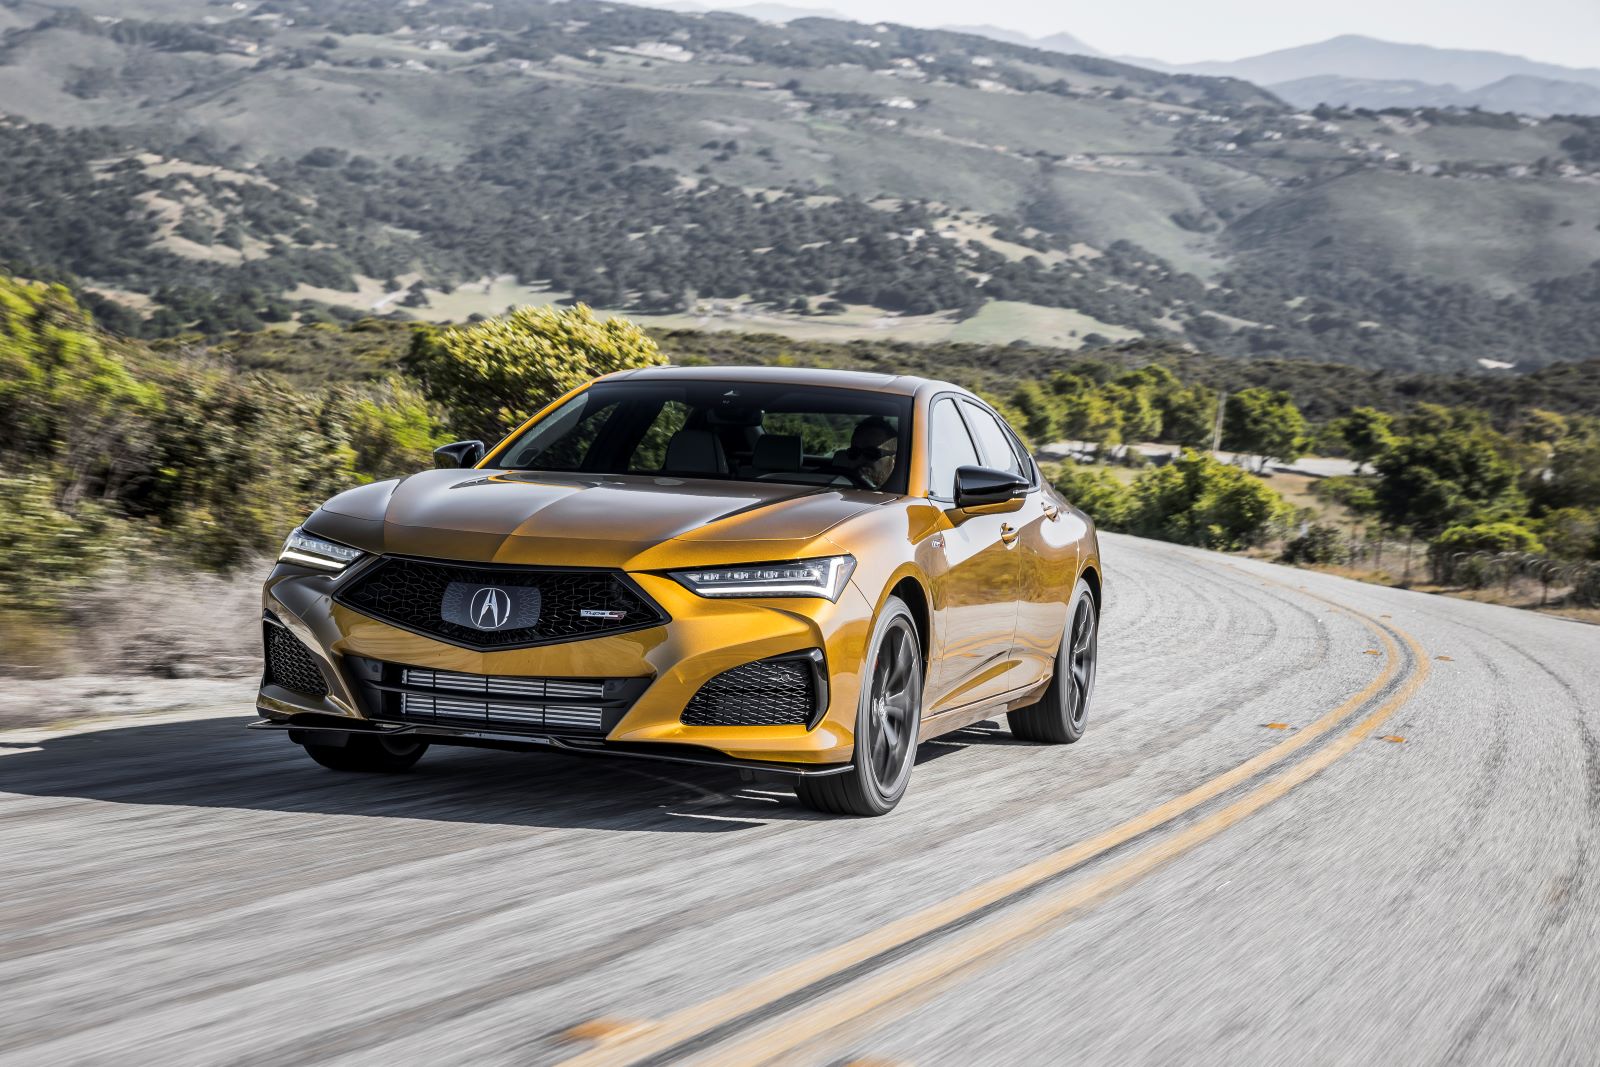 Golden-yellow Acura TLX, a reliable used luxury car, tearing up a winding road in the mountains